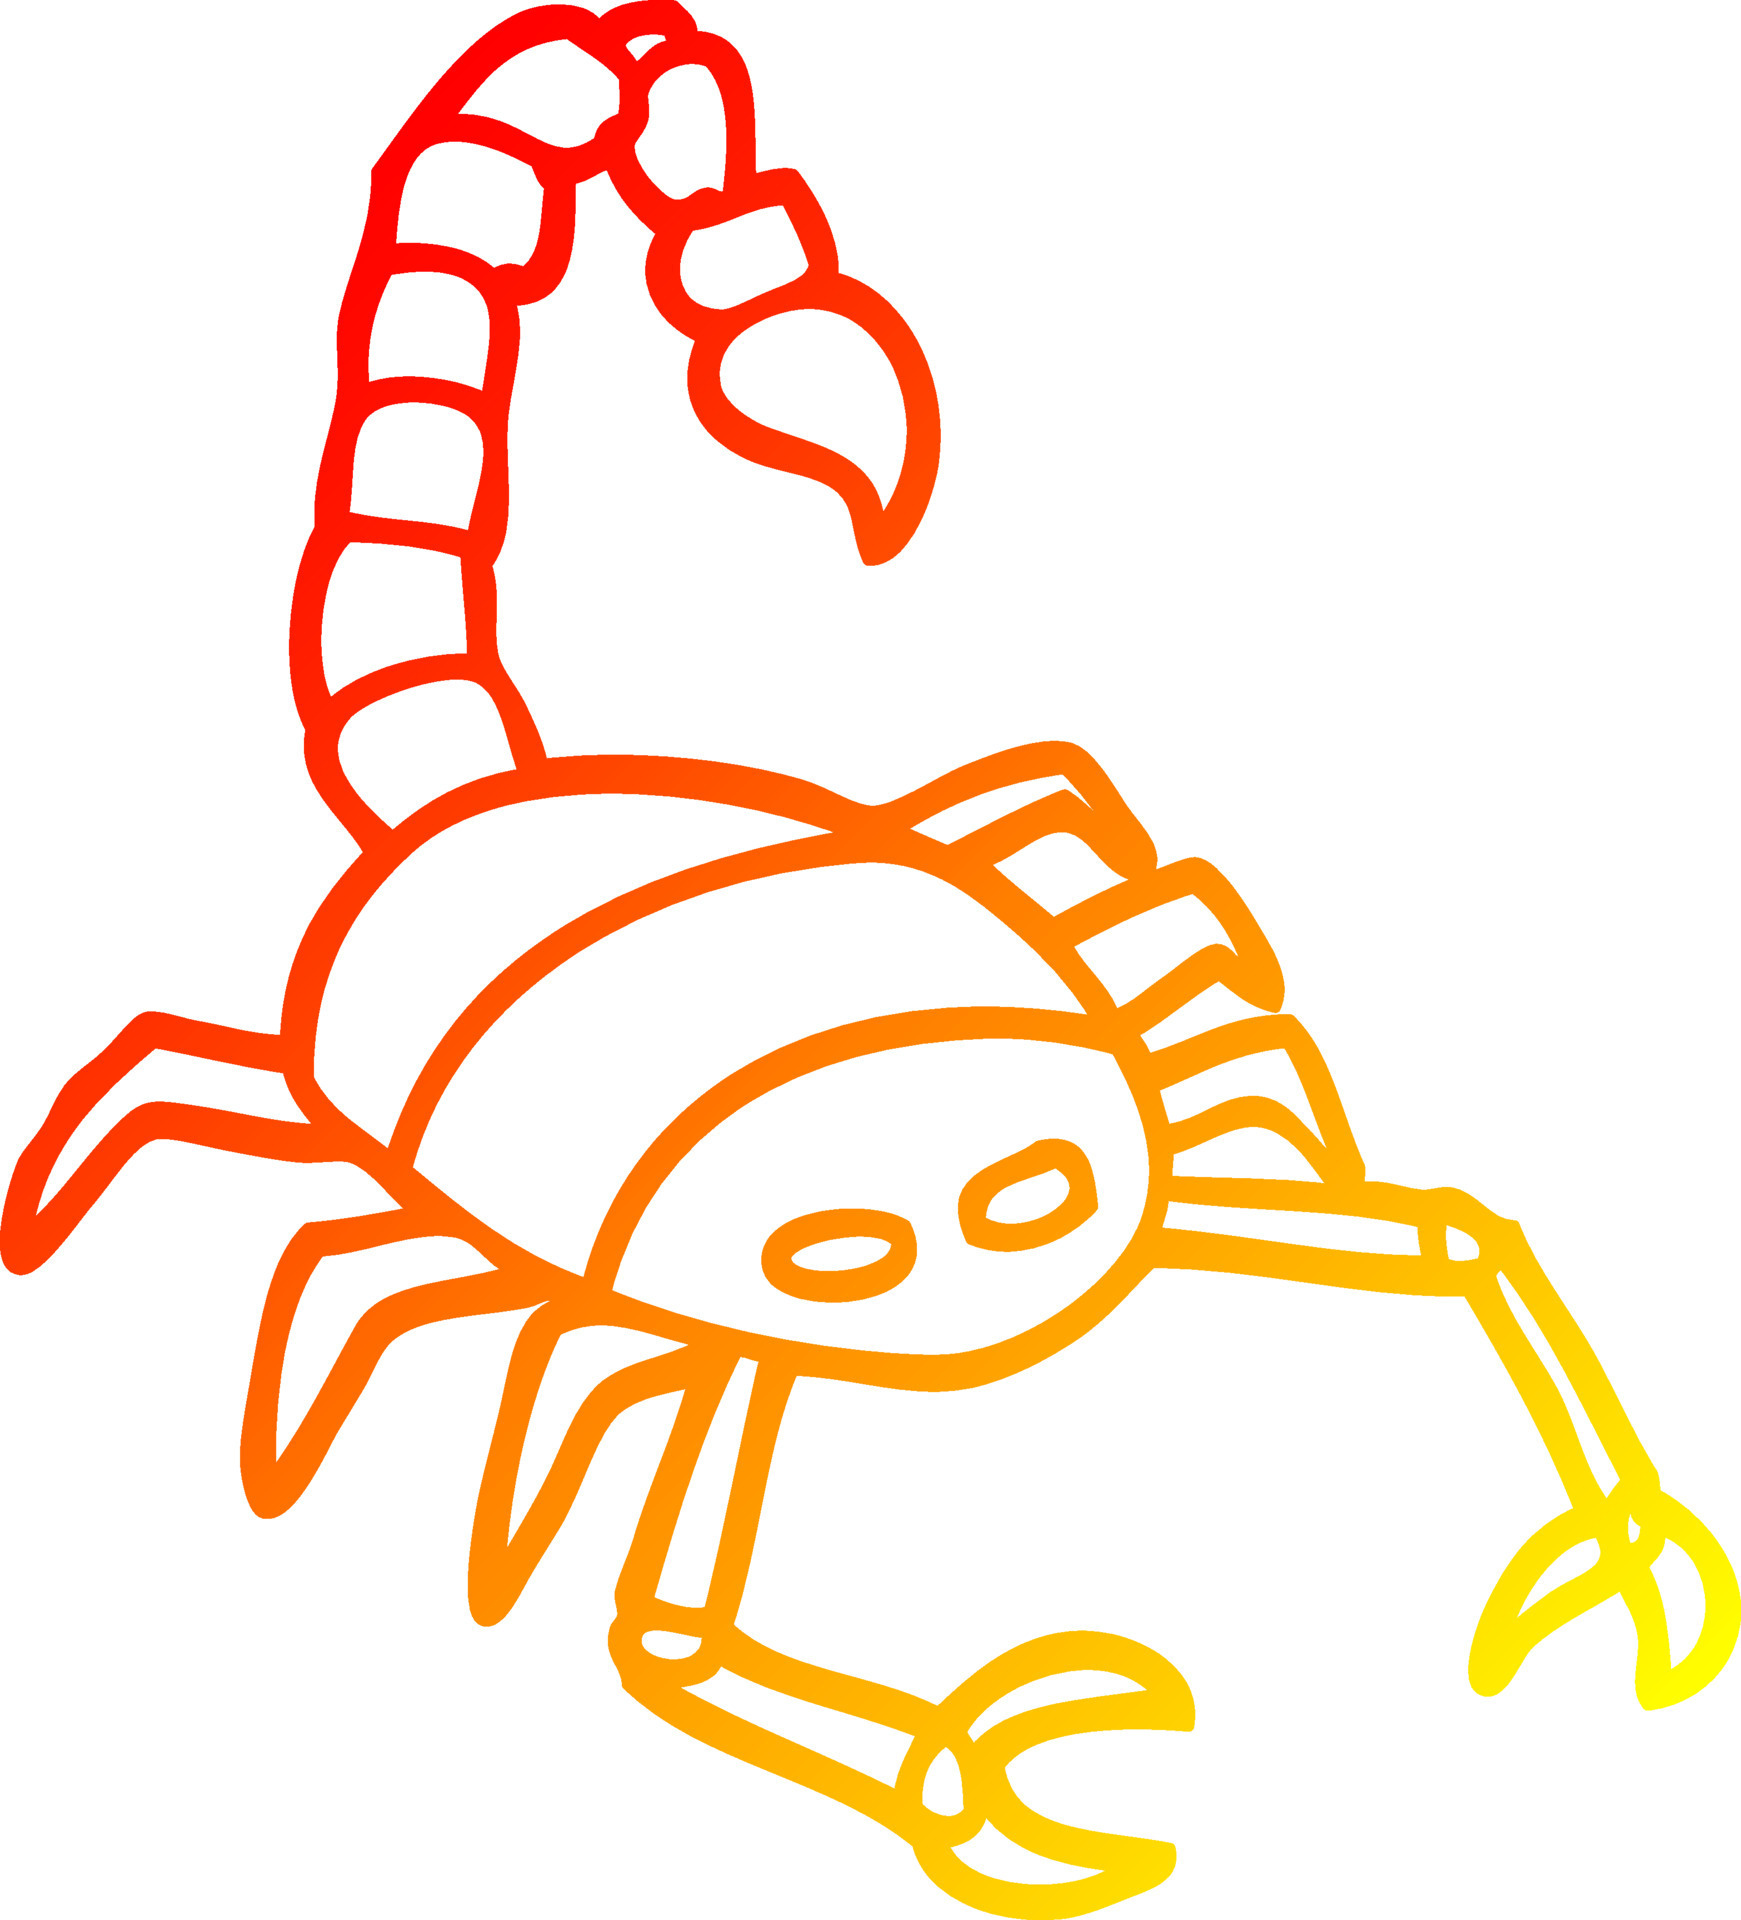 Scorpion Drawing Tutorial - How to draw Scorpion step by step